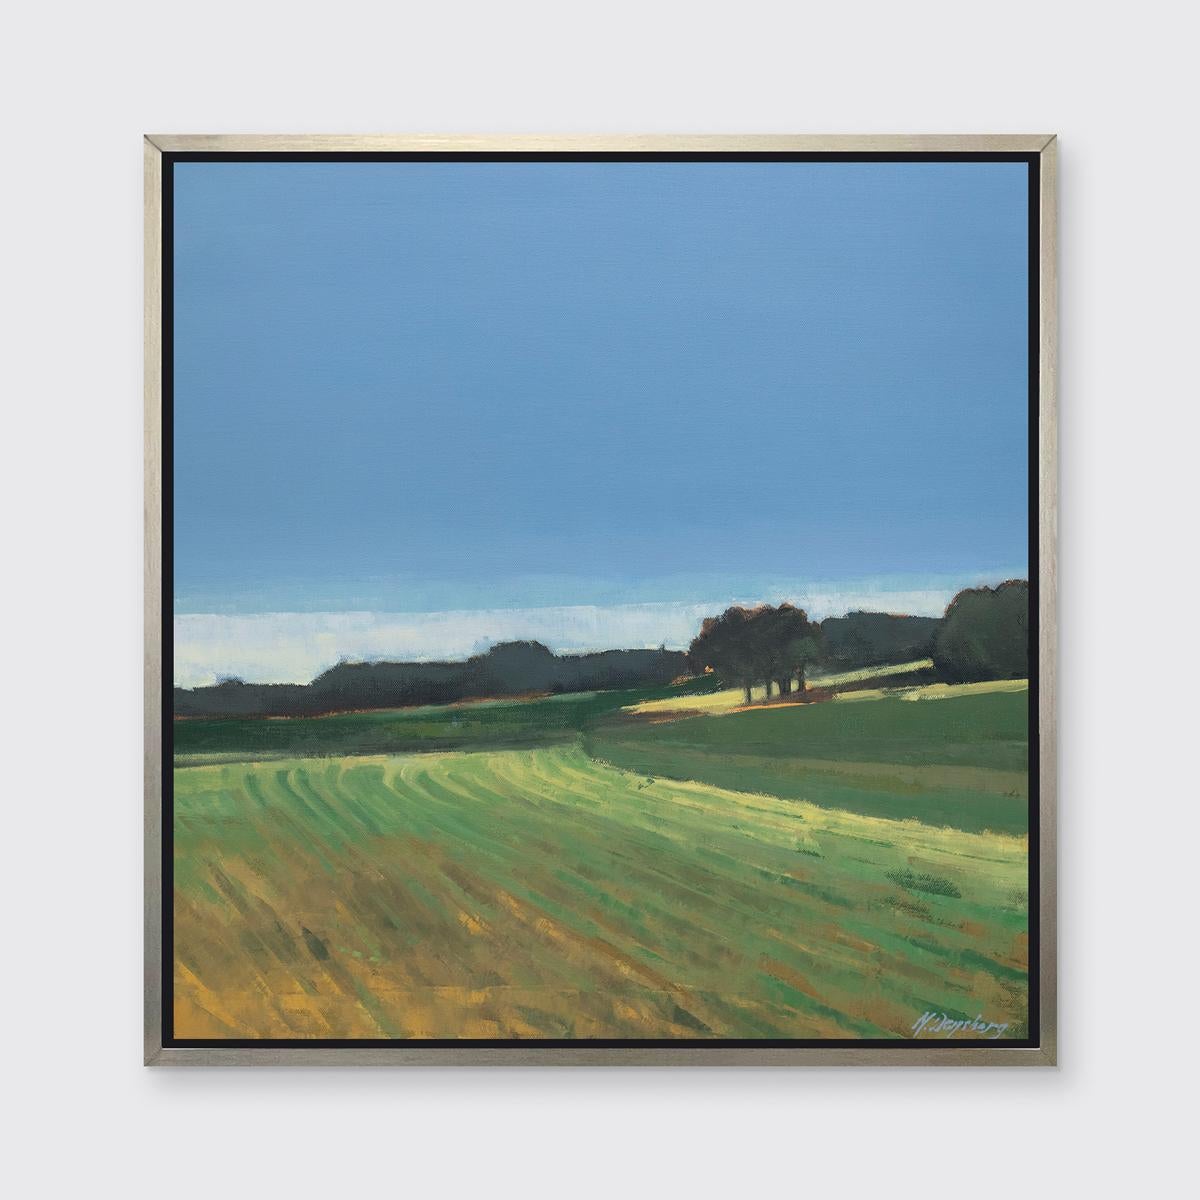 Molly Doe Wensberg Landscape Print - "Cropped Fields" Framed Limited Edition Print, 30" x 30"